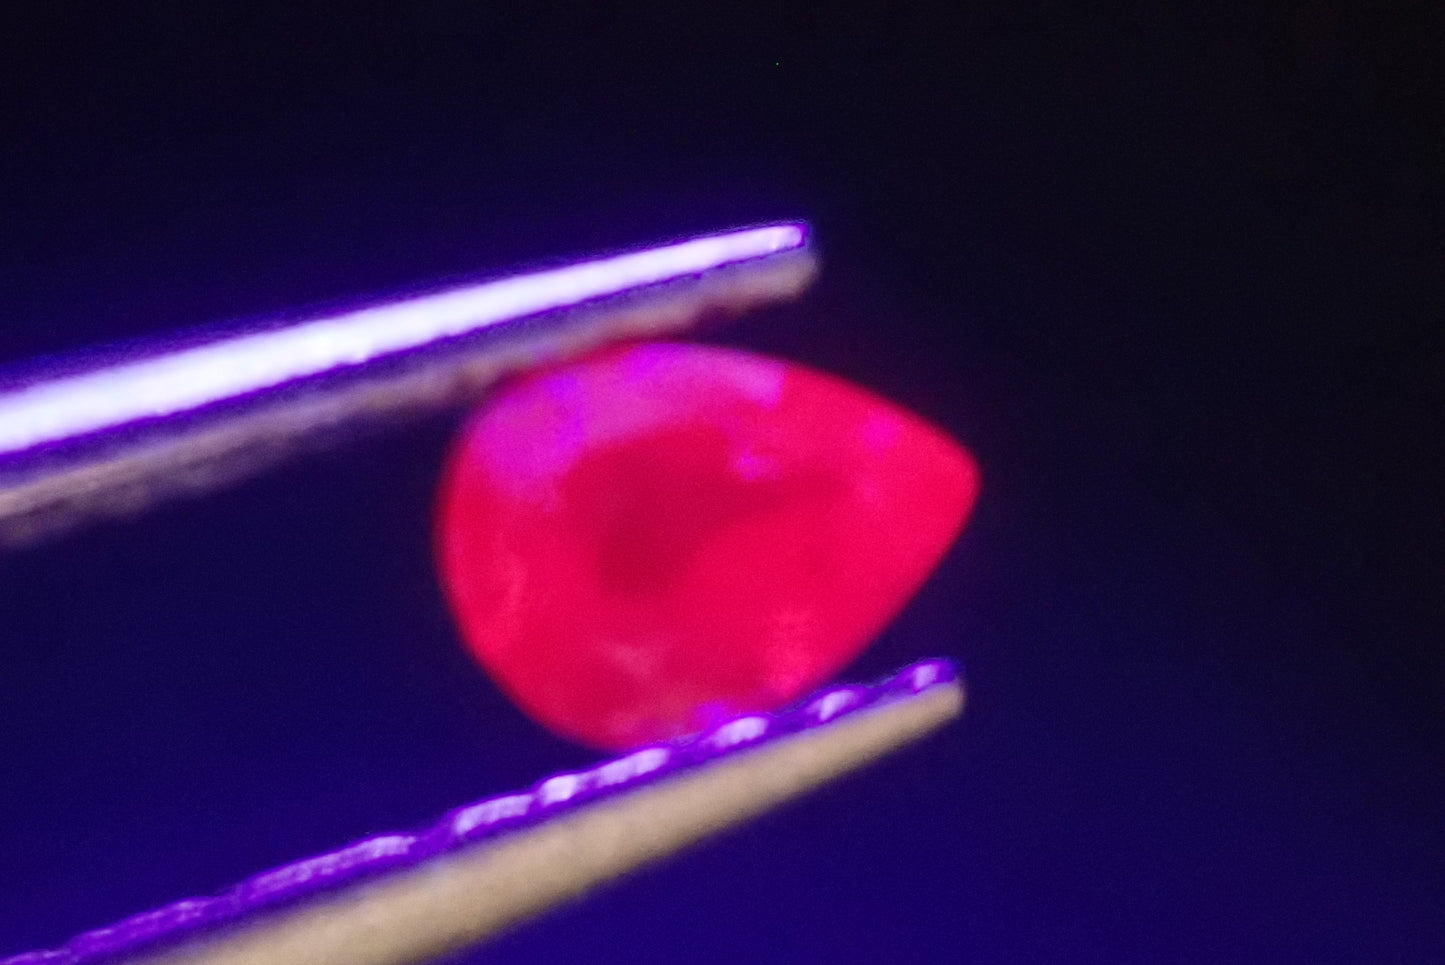 Ruby 0.252ct